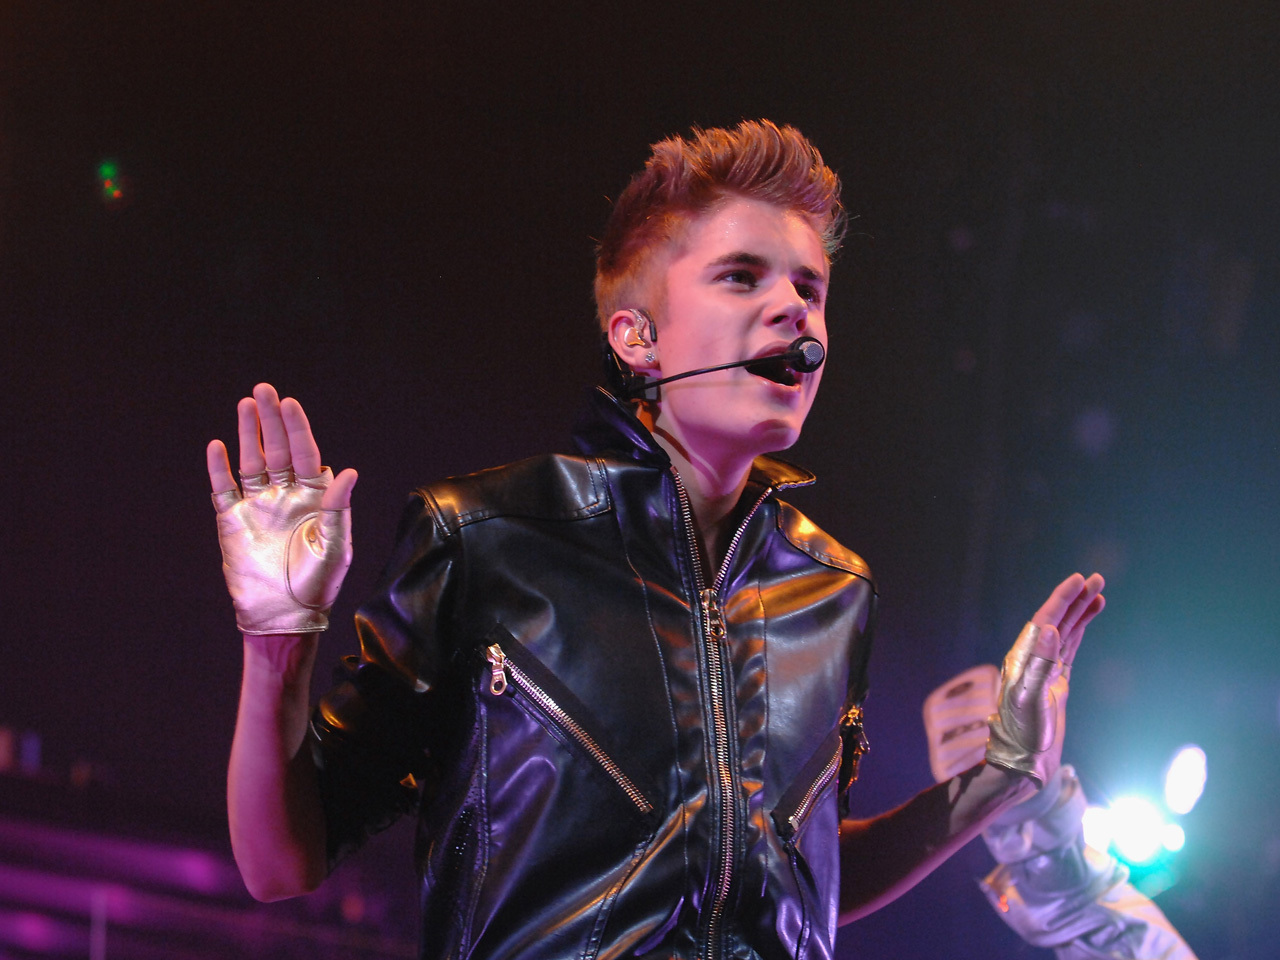 Justin Bieber gets sick twice on stage at concert in Arizona CBS News